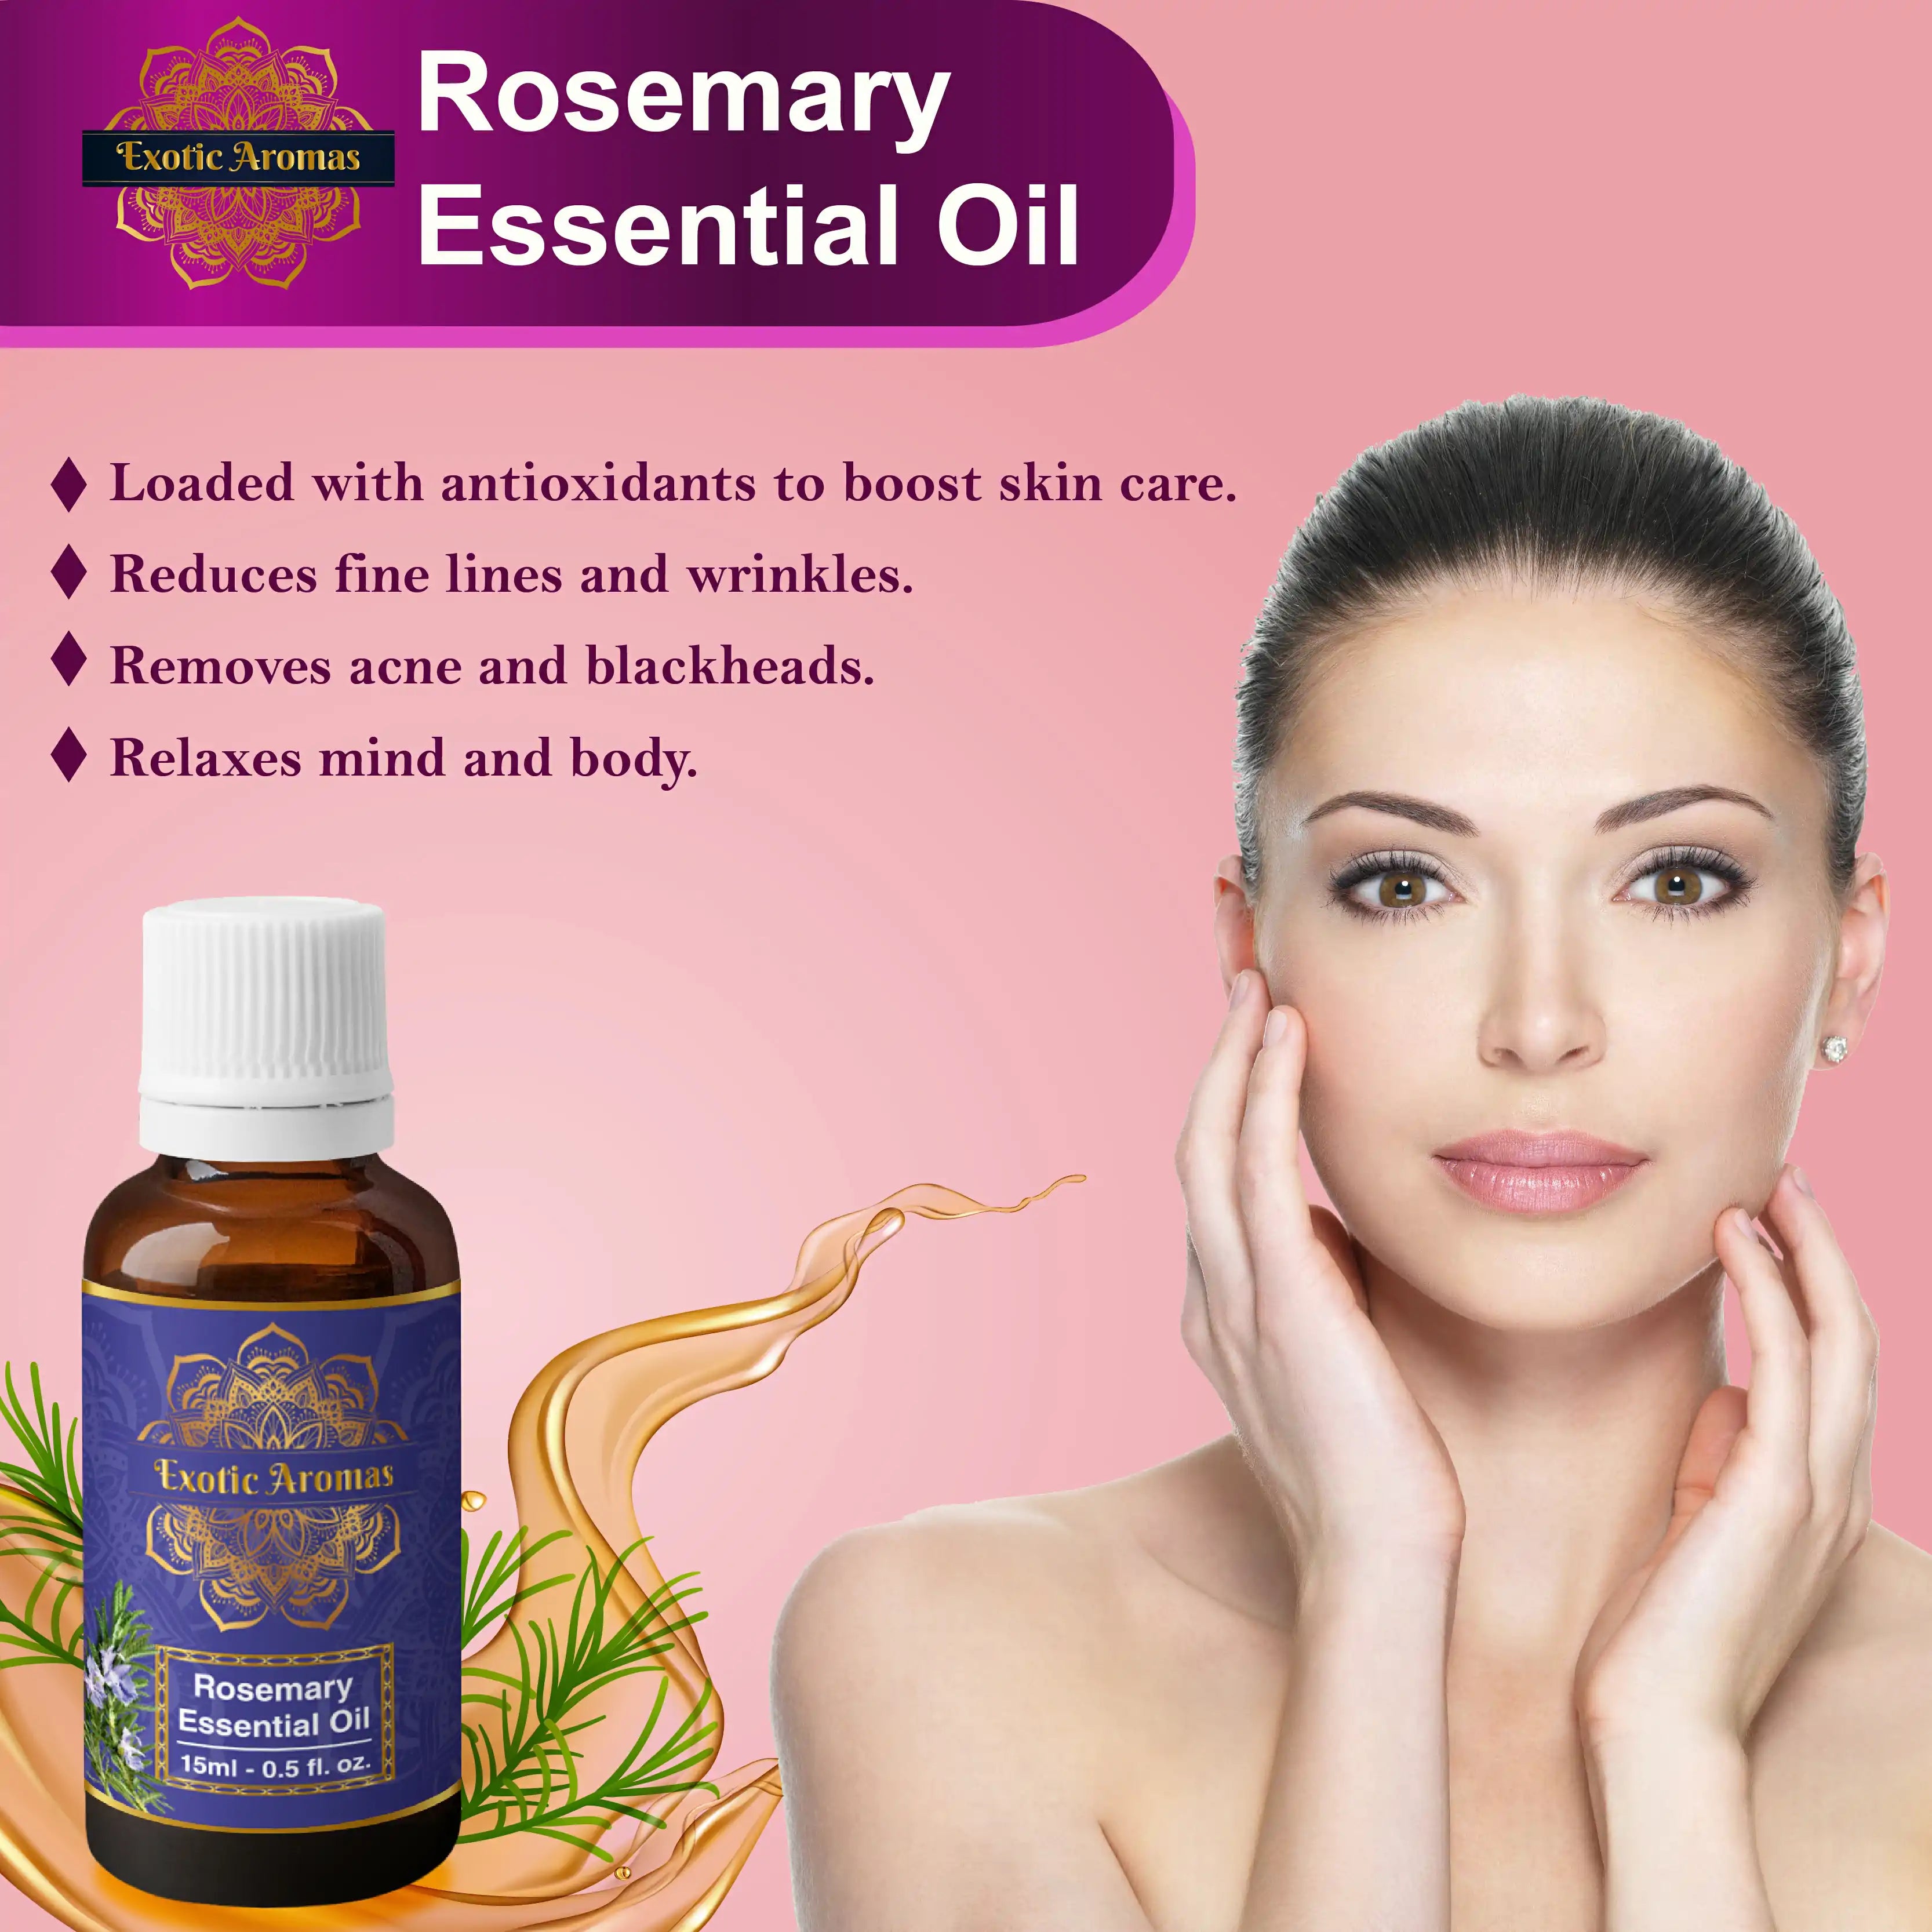 Rosemary Oil for Hair Growth, Skin, Aromatherapy (15 Ml+15 Ml) Pack of 2